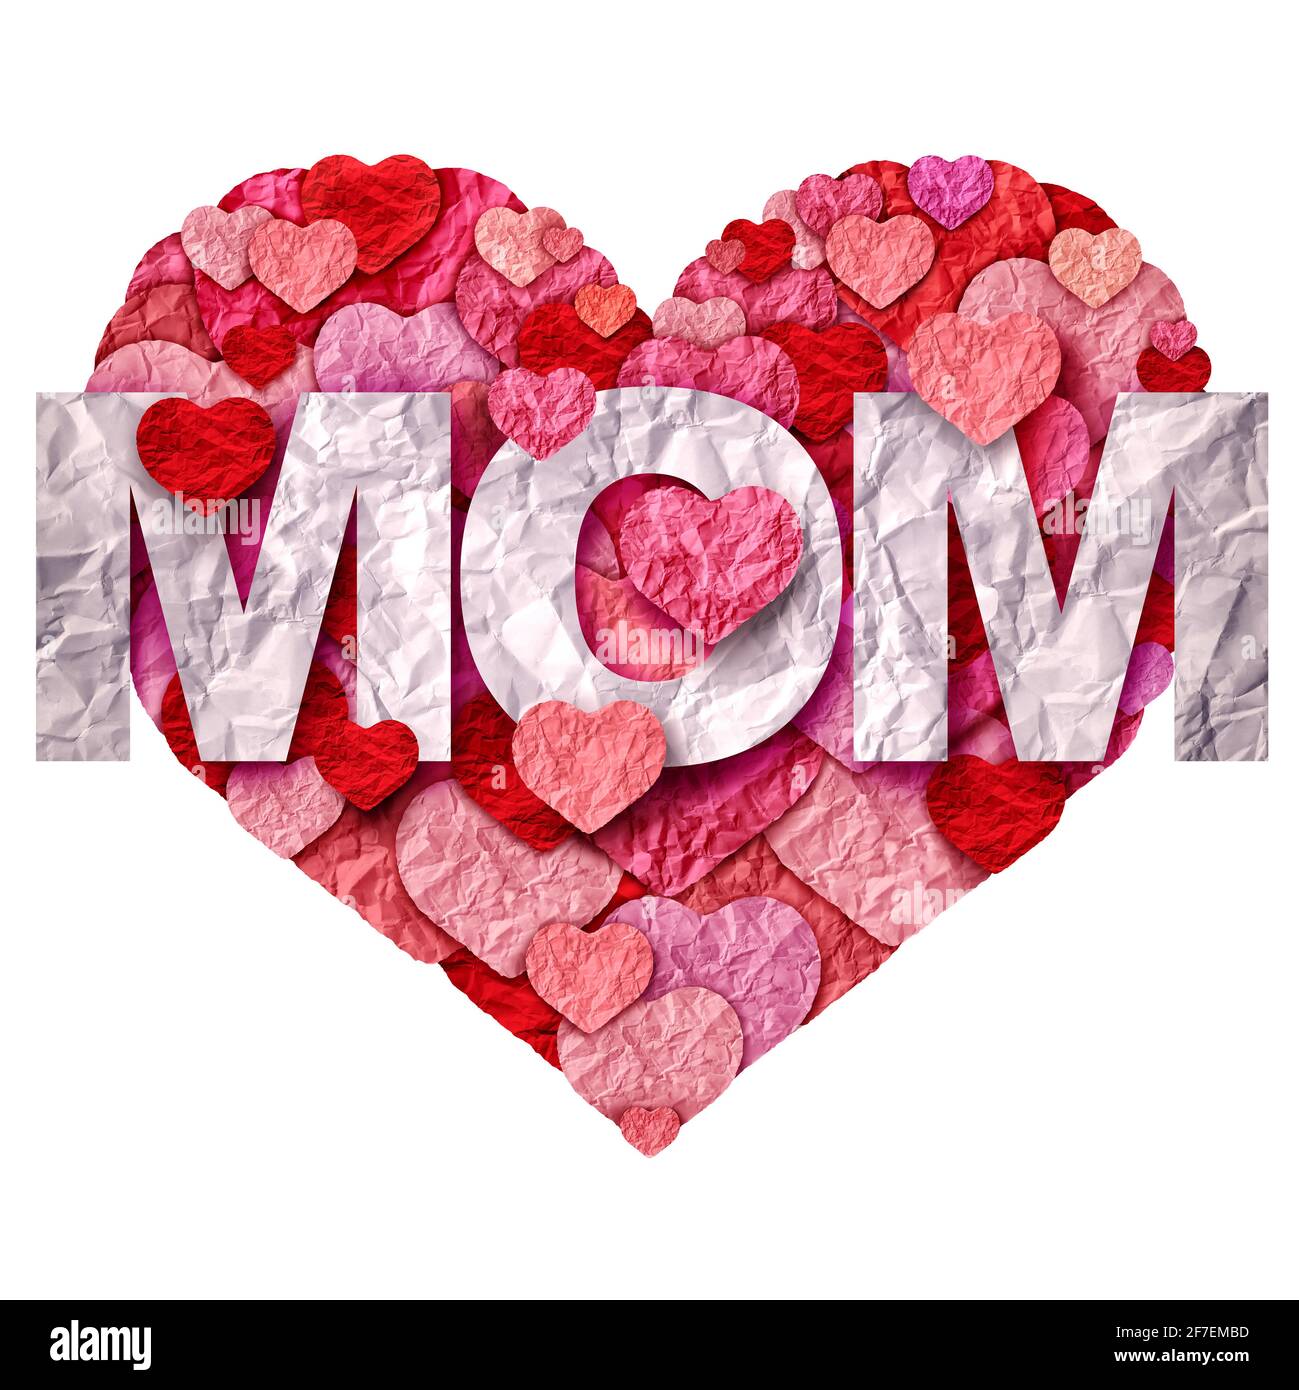 Mothers Day greeting and celebration or love for mom in a 3D illustration style. Stock Photo